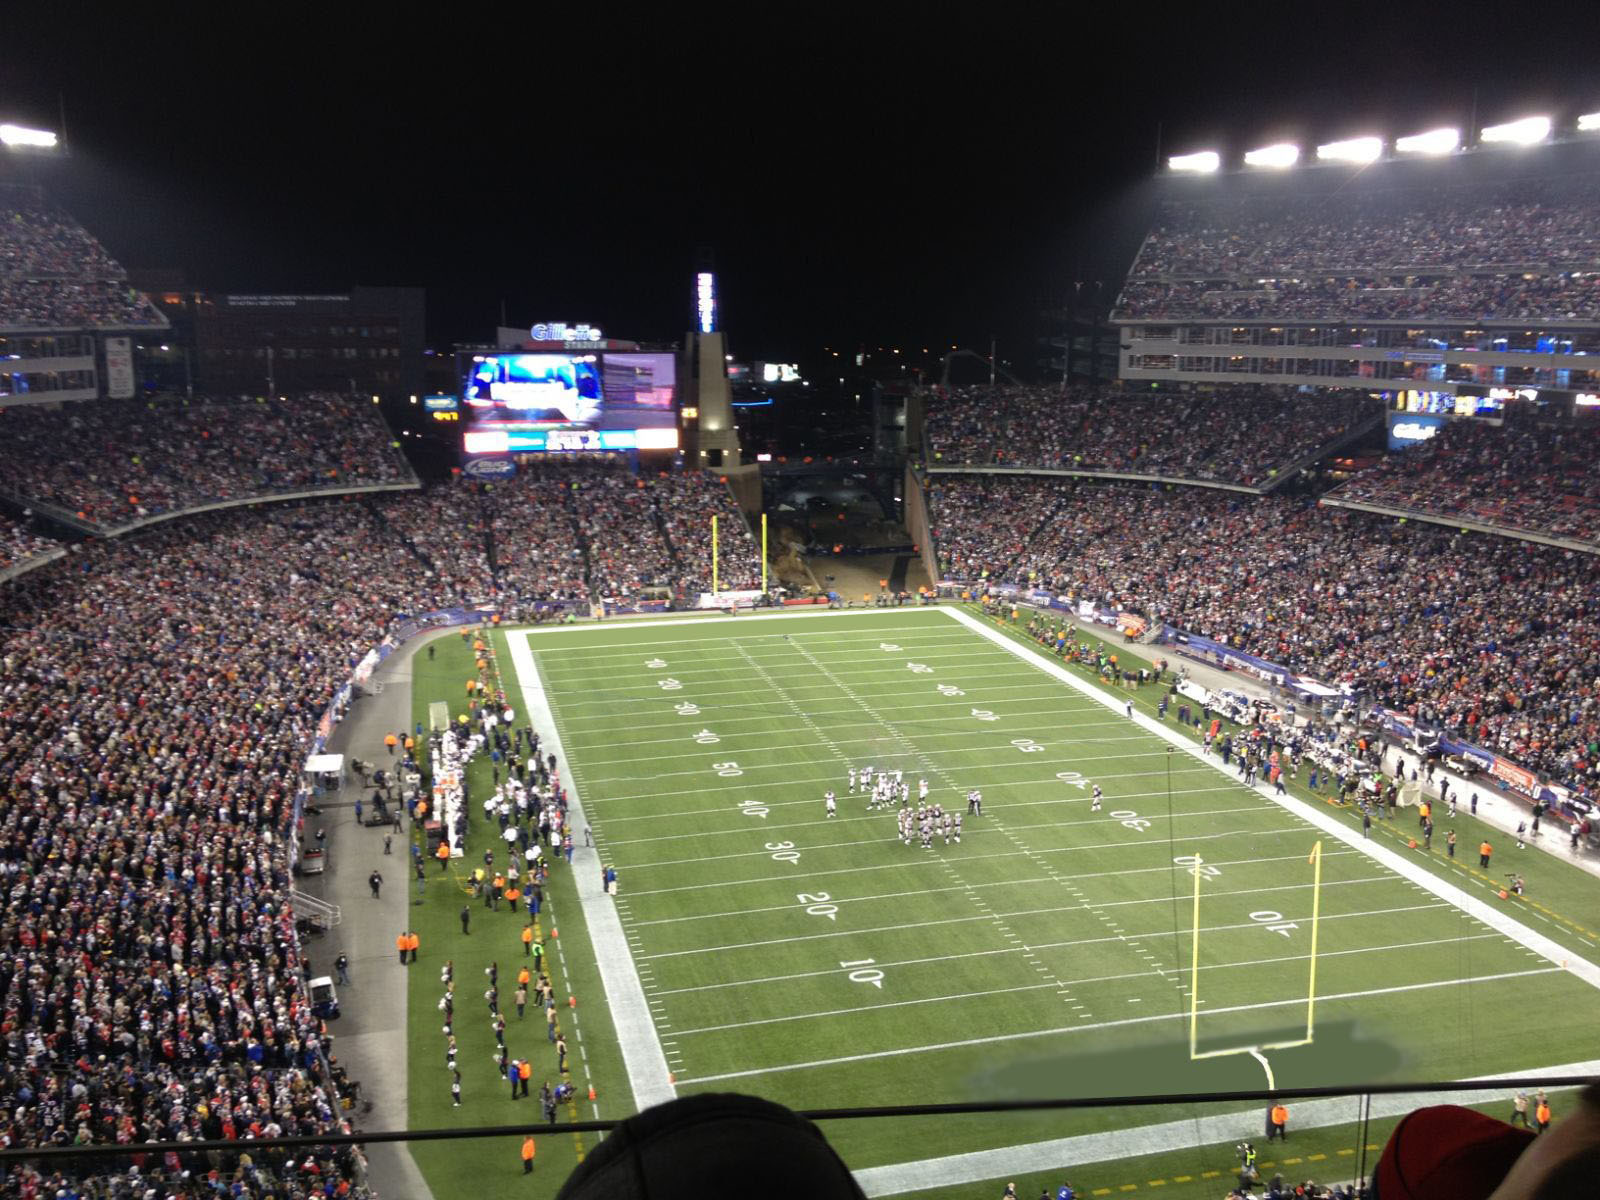 section 319, row 4 seat view  for football - gillette stadium